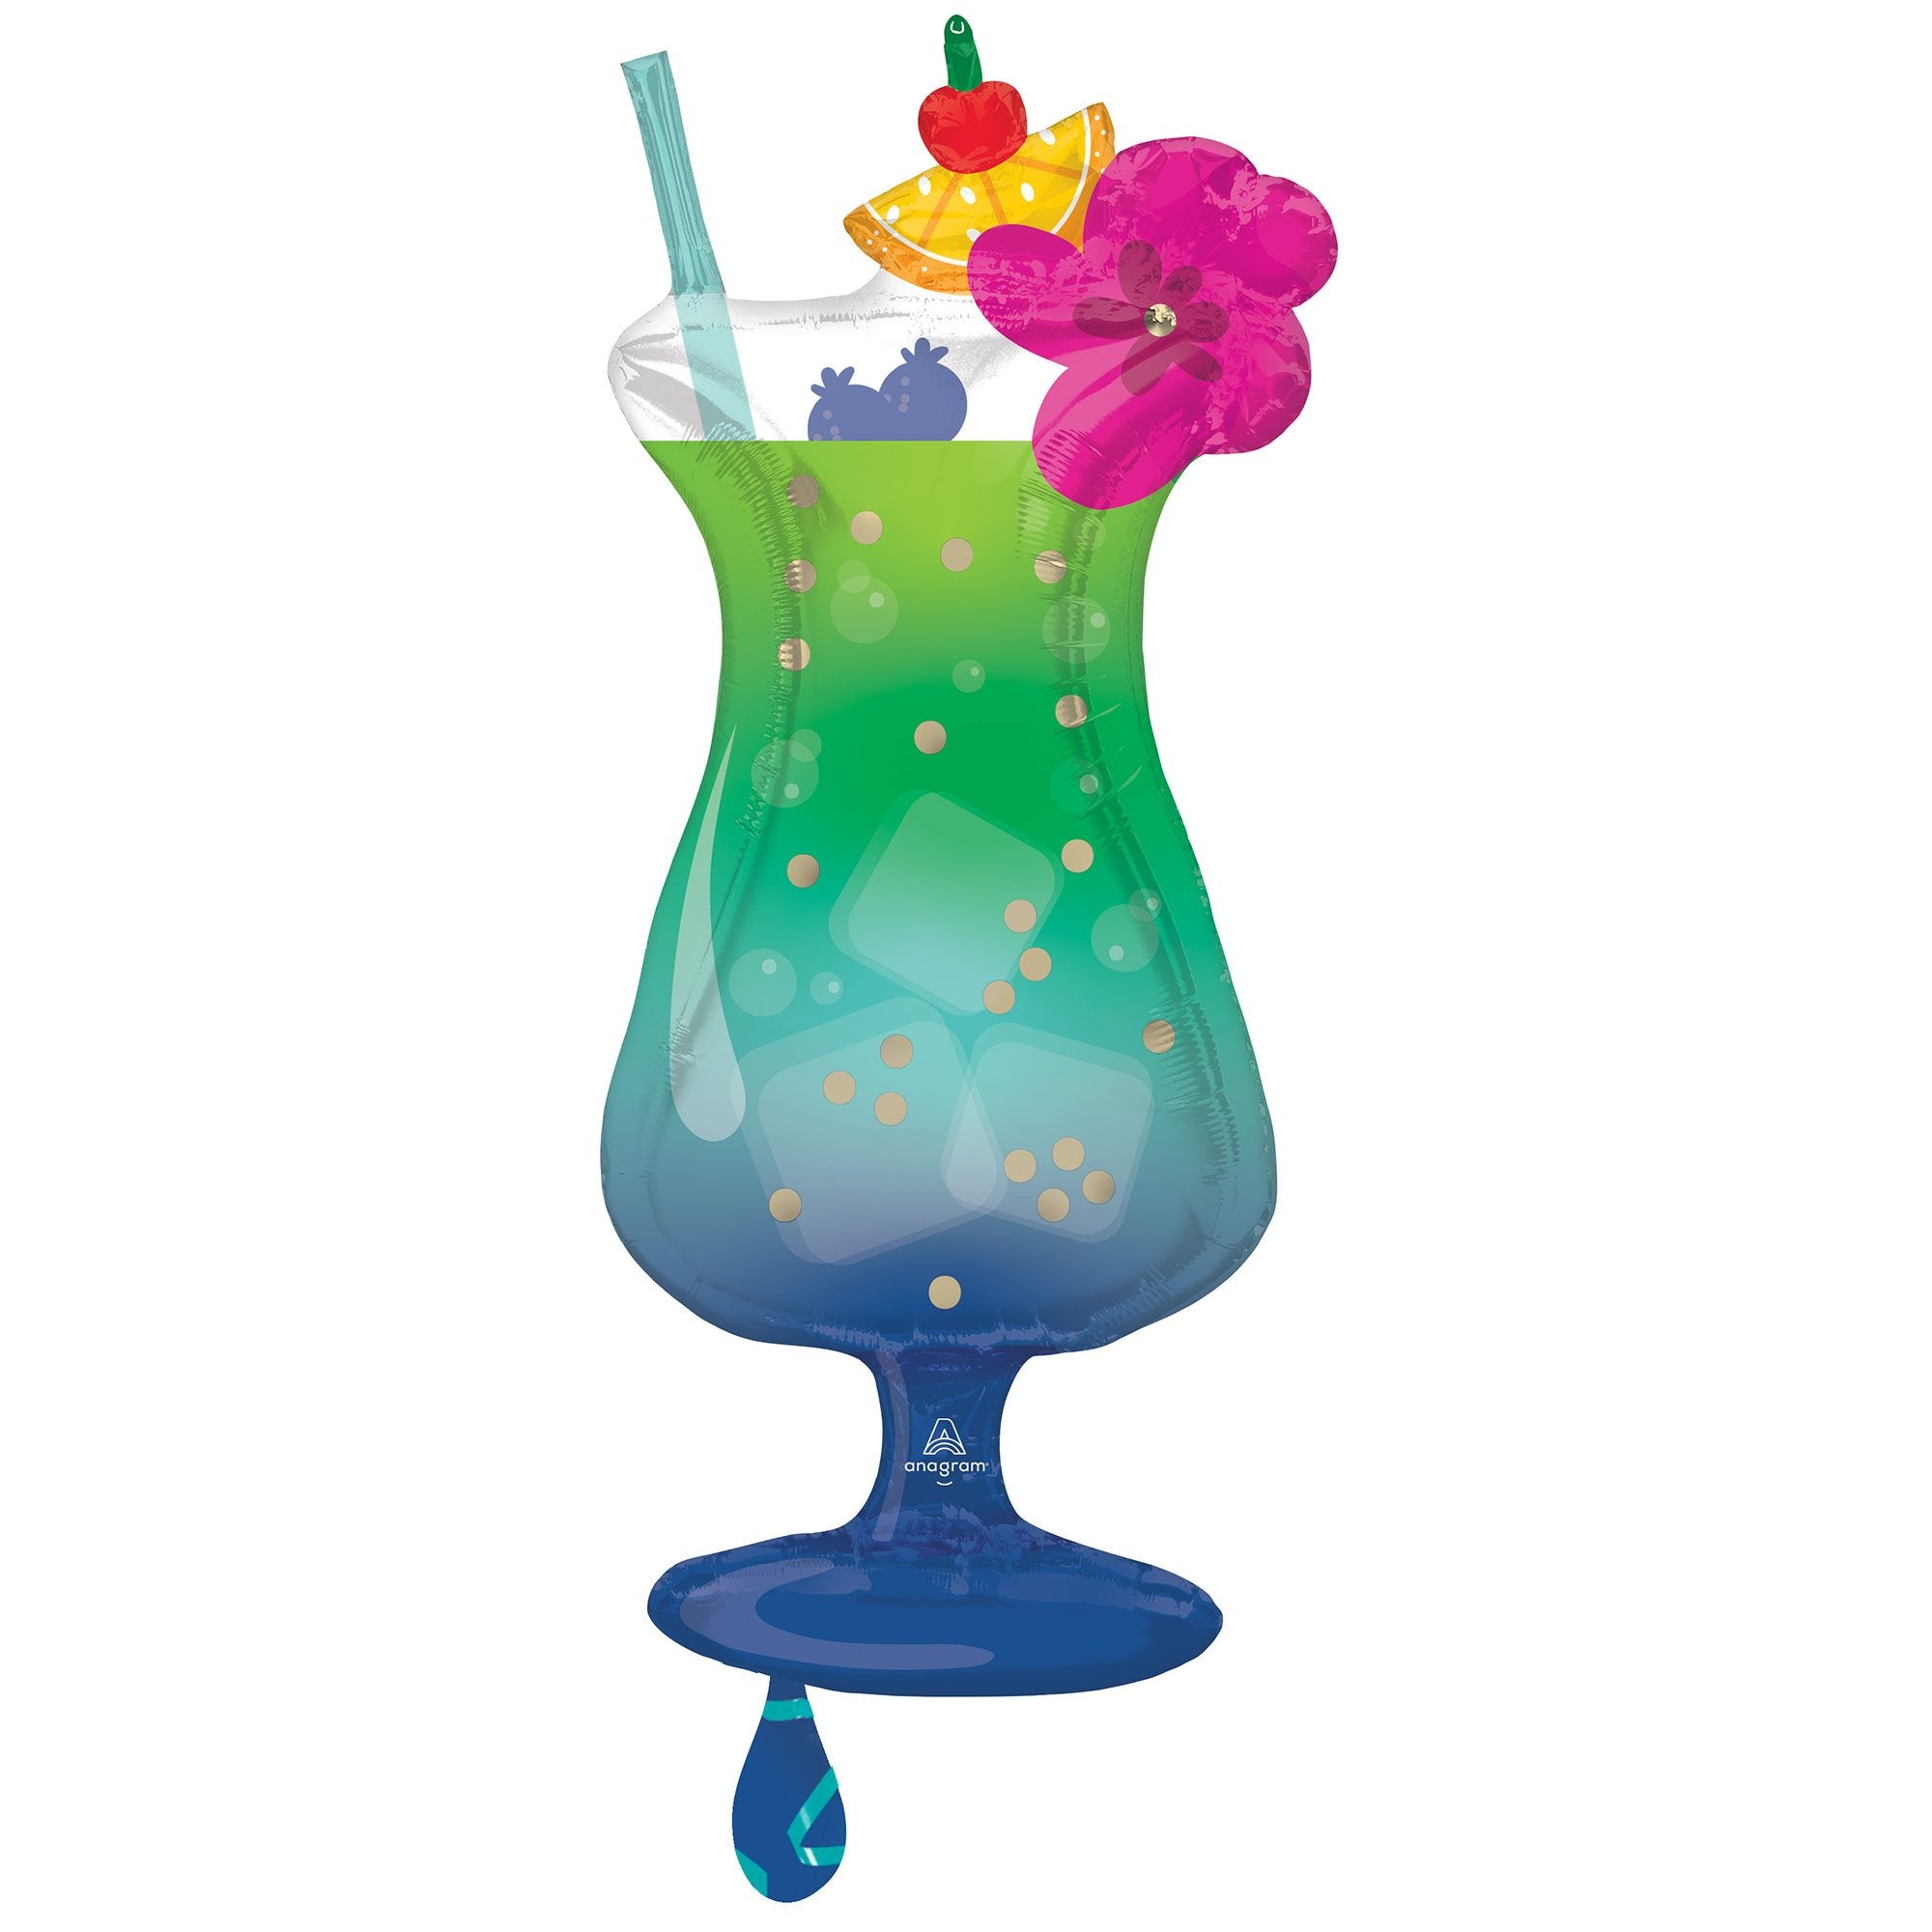 Party Empress' Tropical balloons are balloons designed with vibrant colours, exotic prints, and themes inspired by tropical elements. These balloons are often used for various occasions where a tropical or beachy atmosphere is desired.